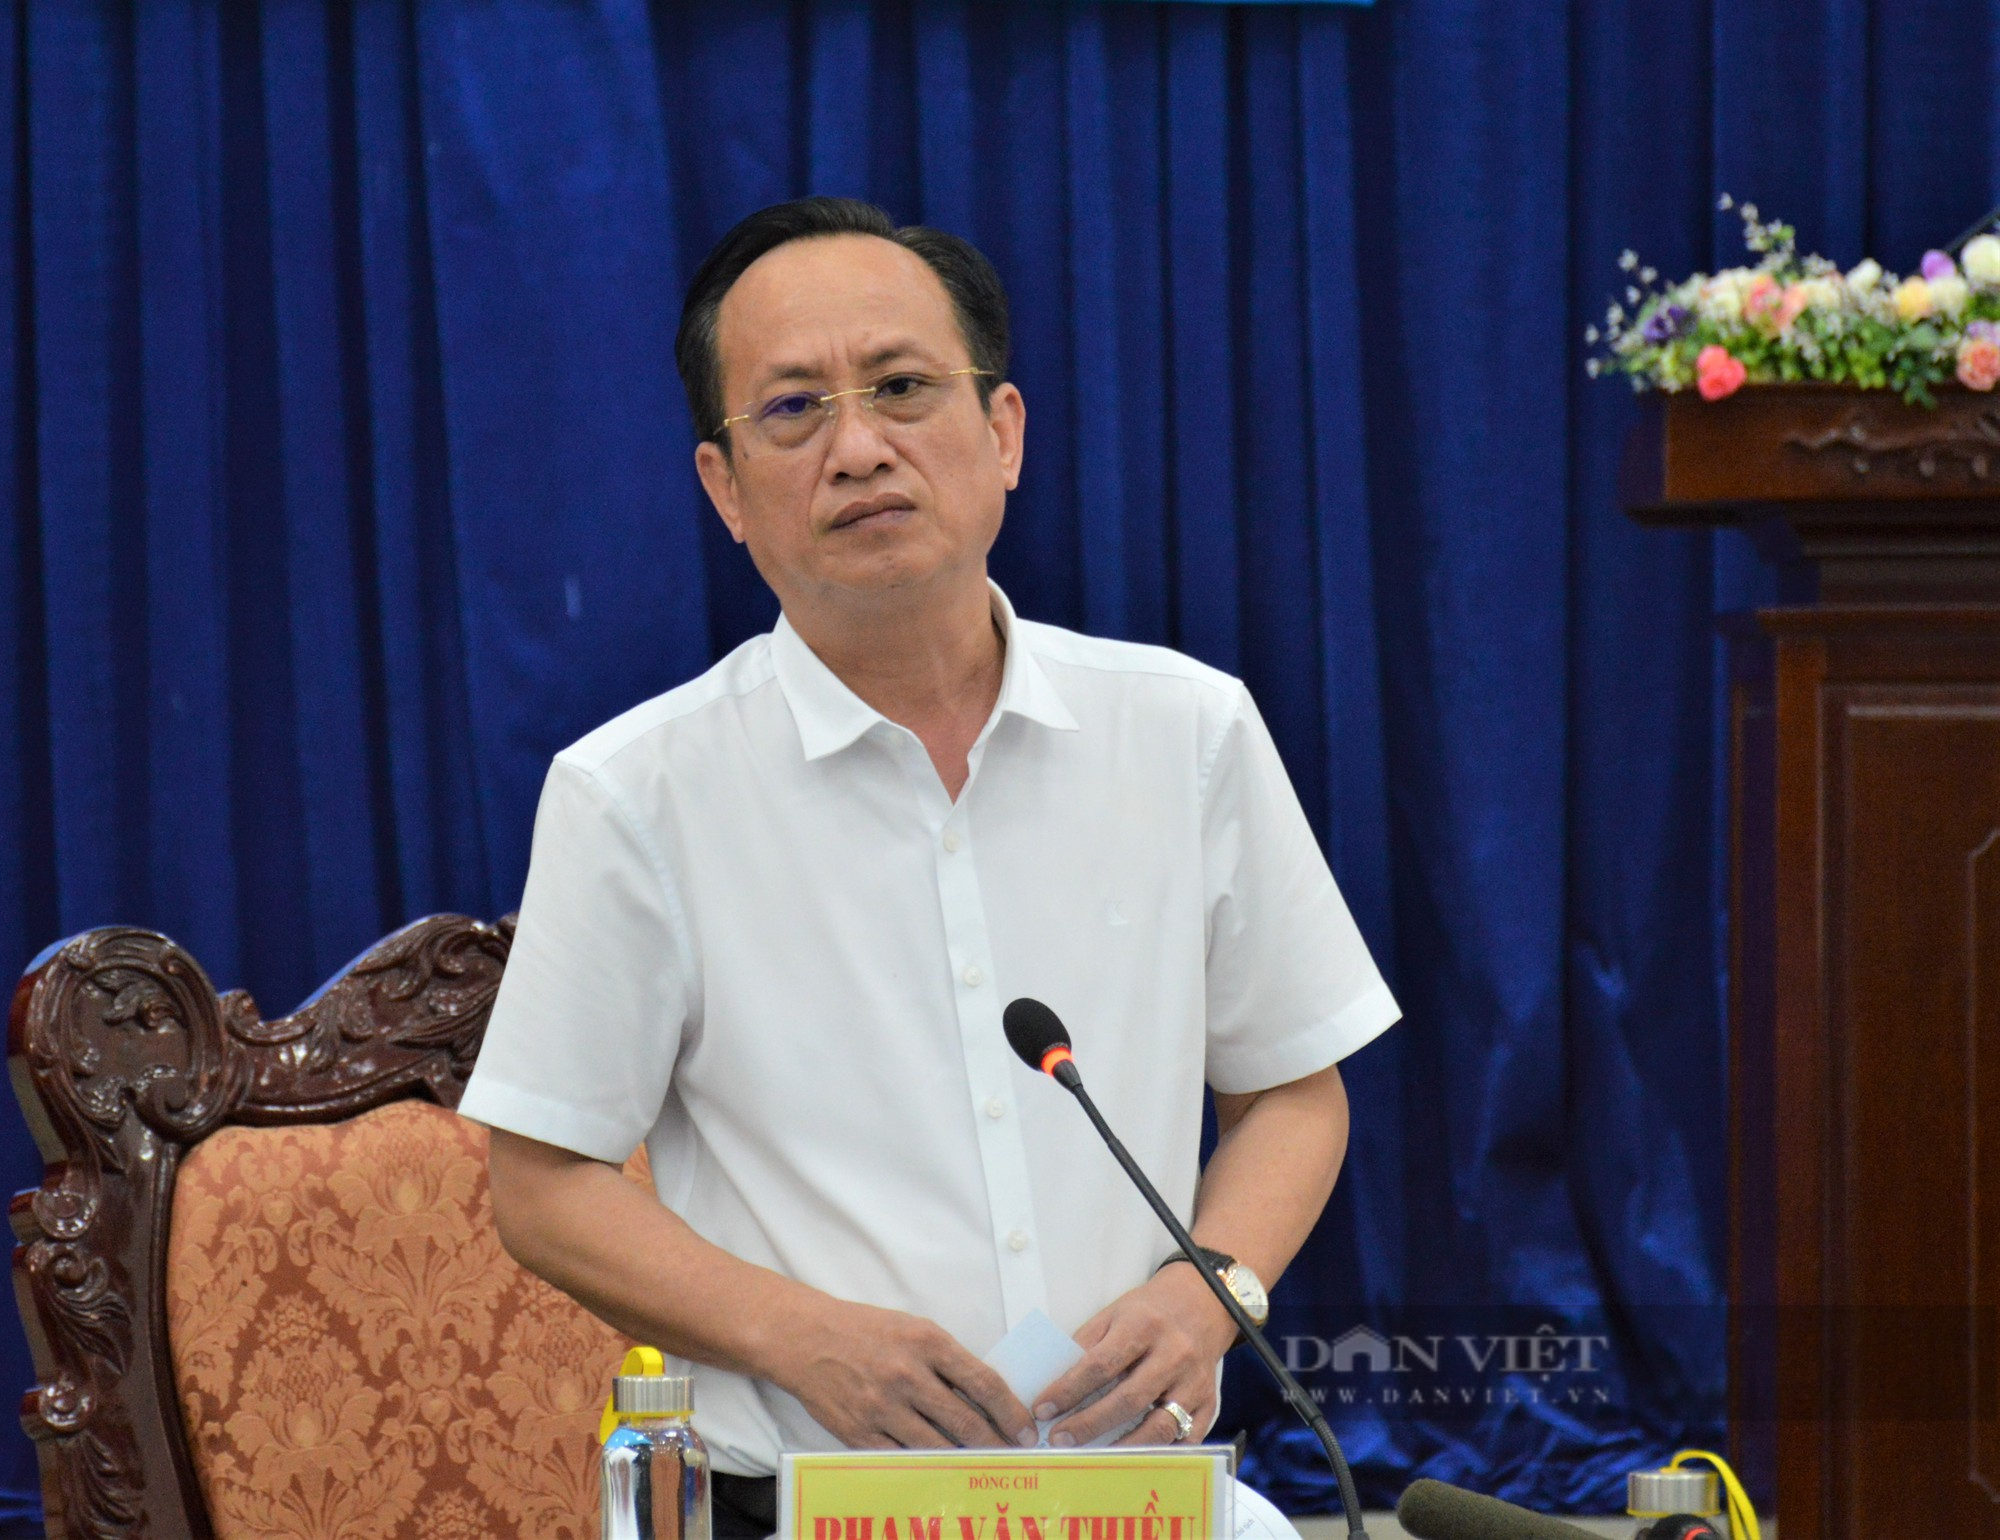 The President of Bac Lieu province said that the reason why the hospital invested more than 200 billion VND 